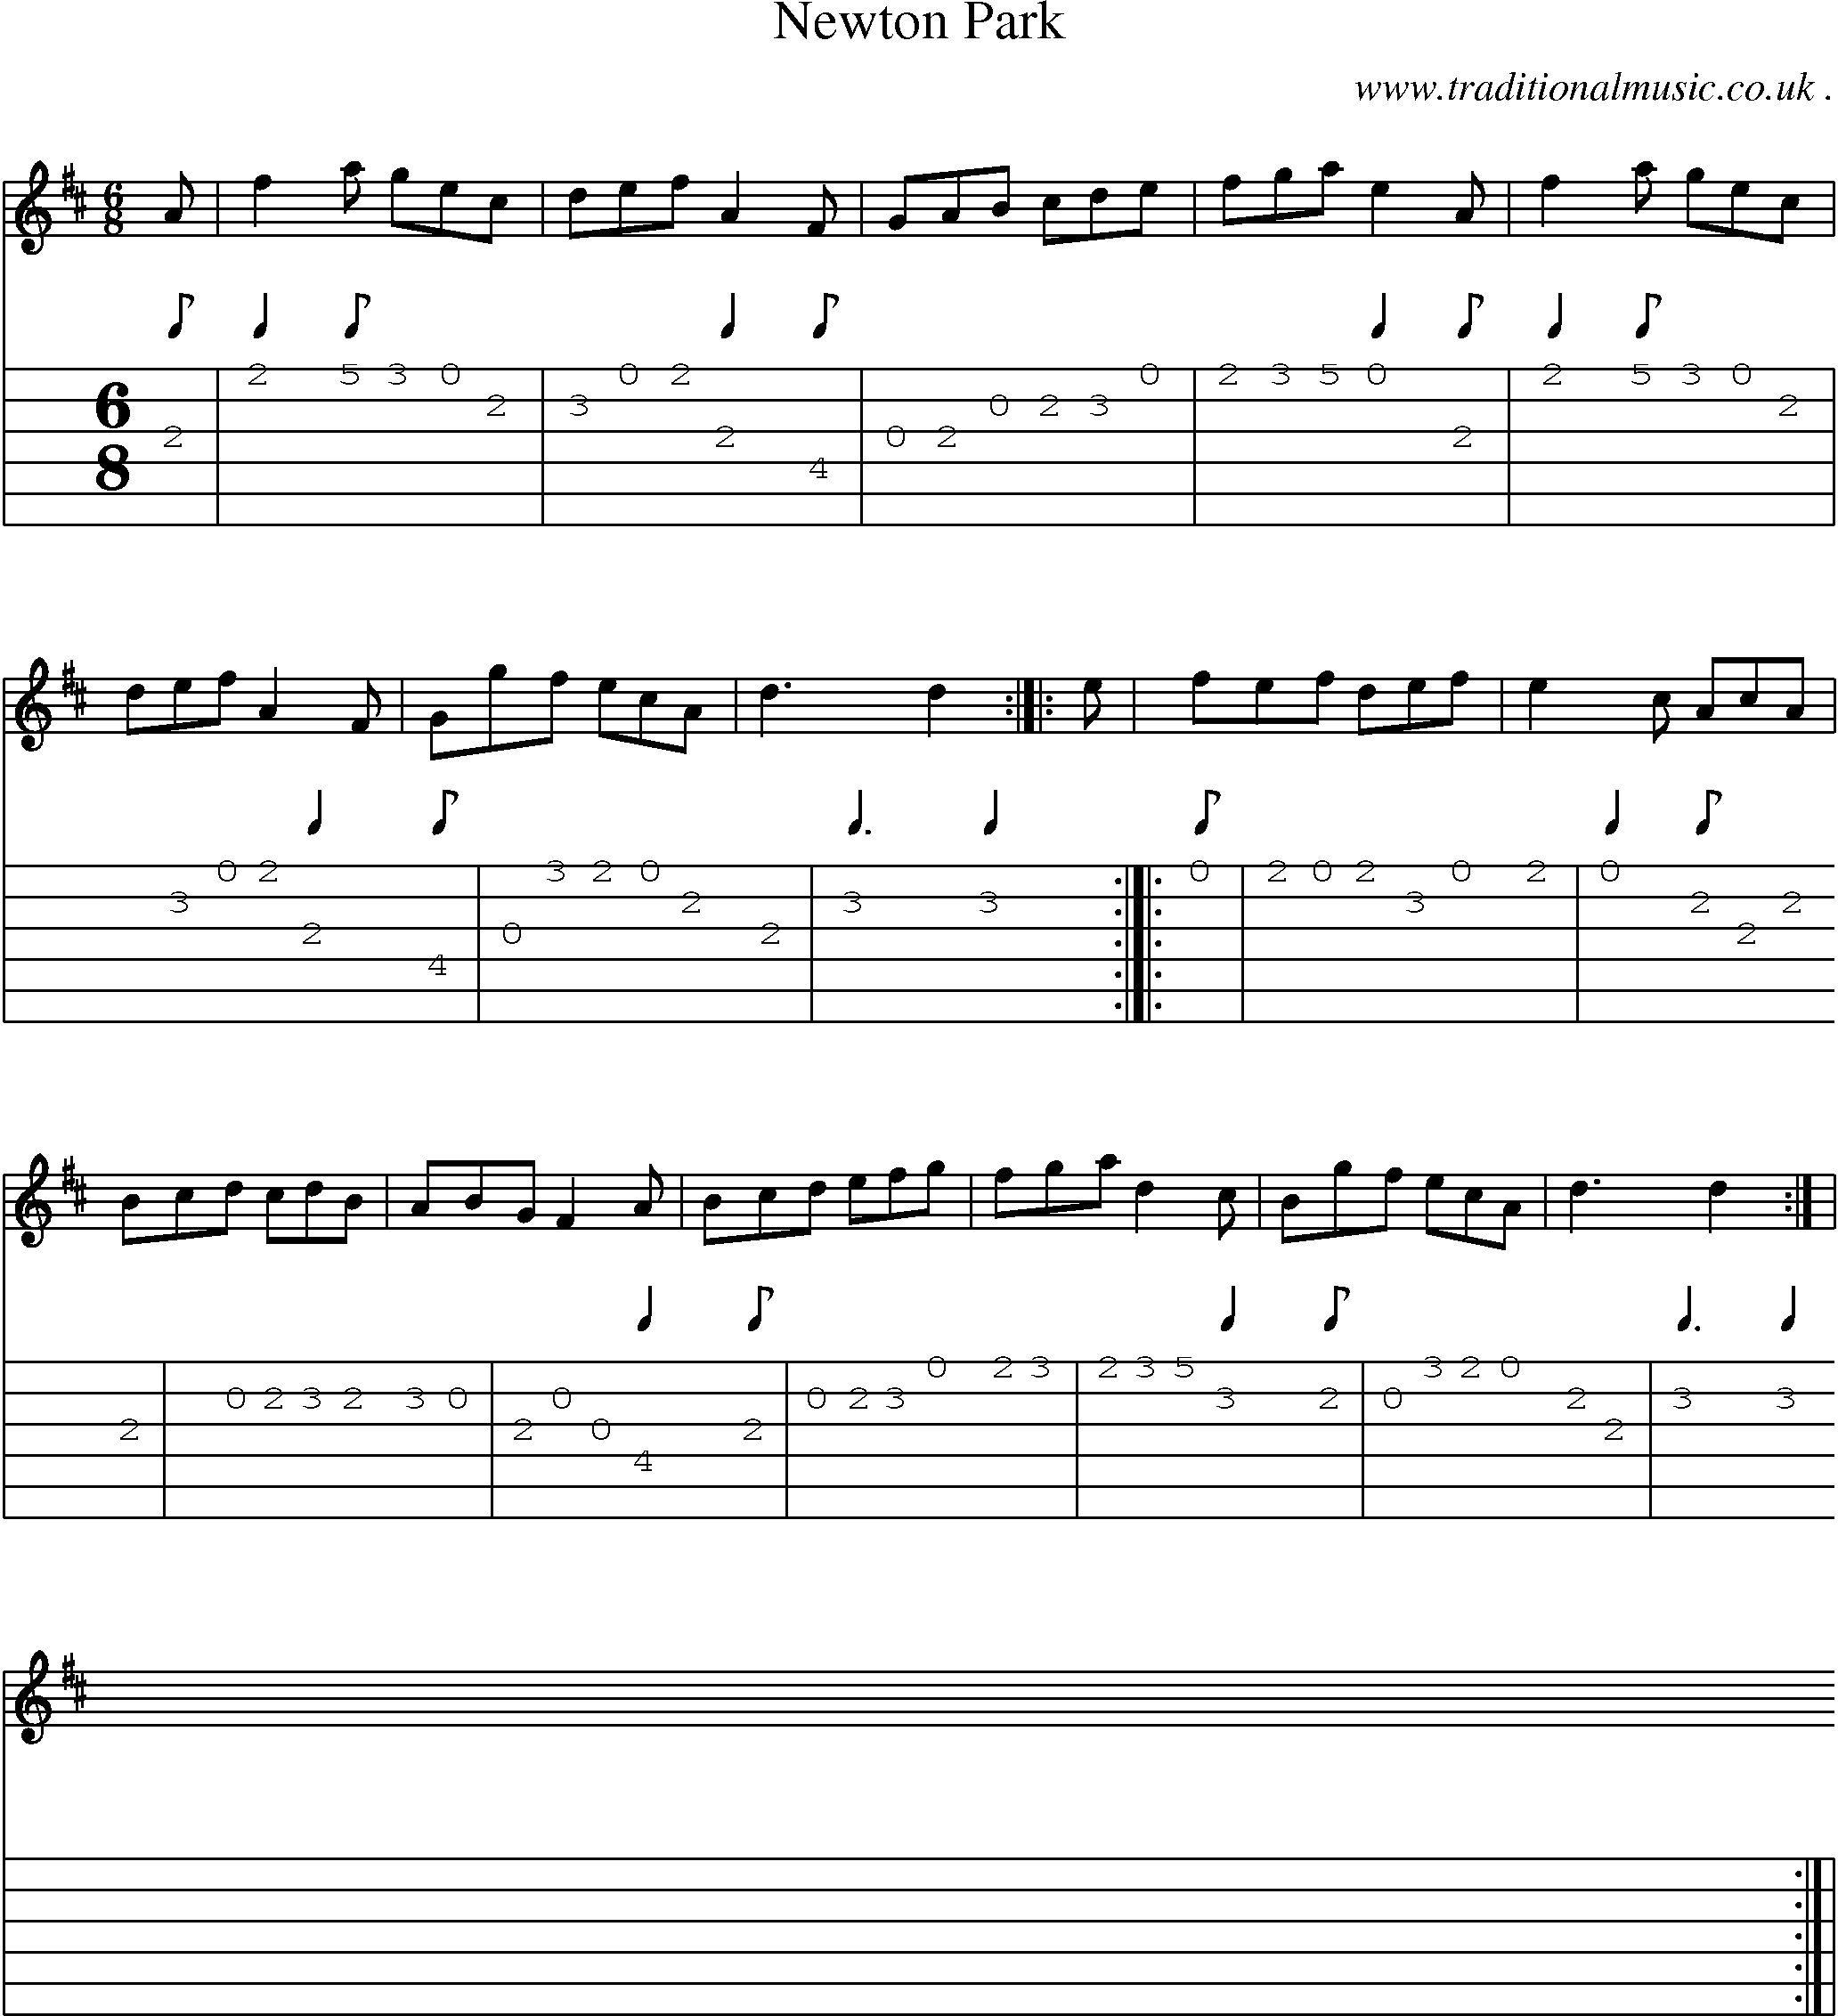 Sheet-music  score, Chords and Guitar Tabs for Newton Park